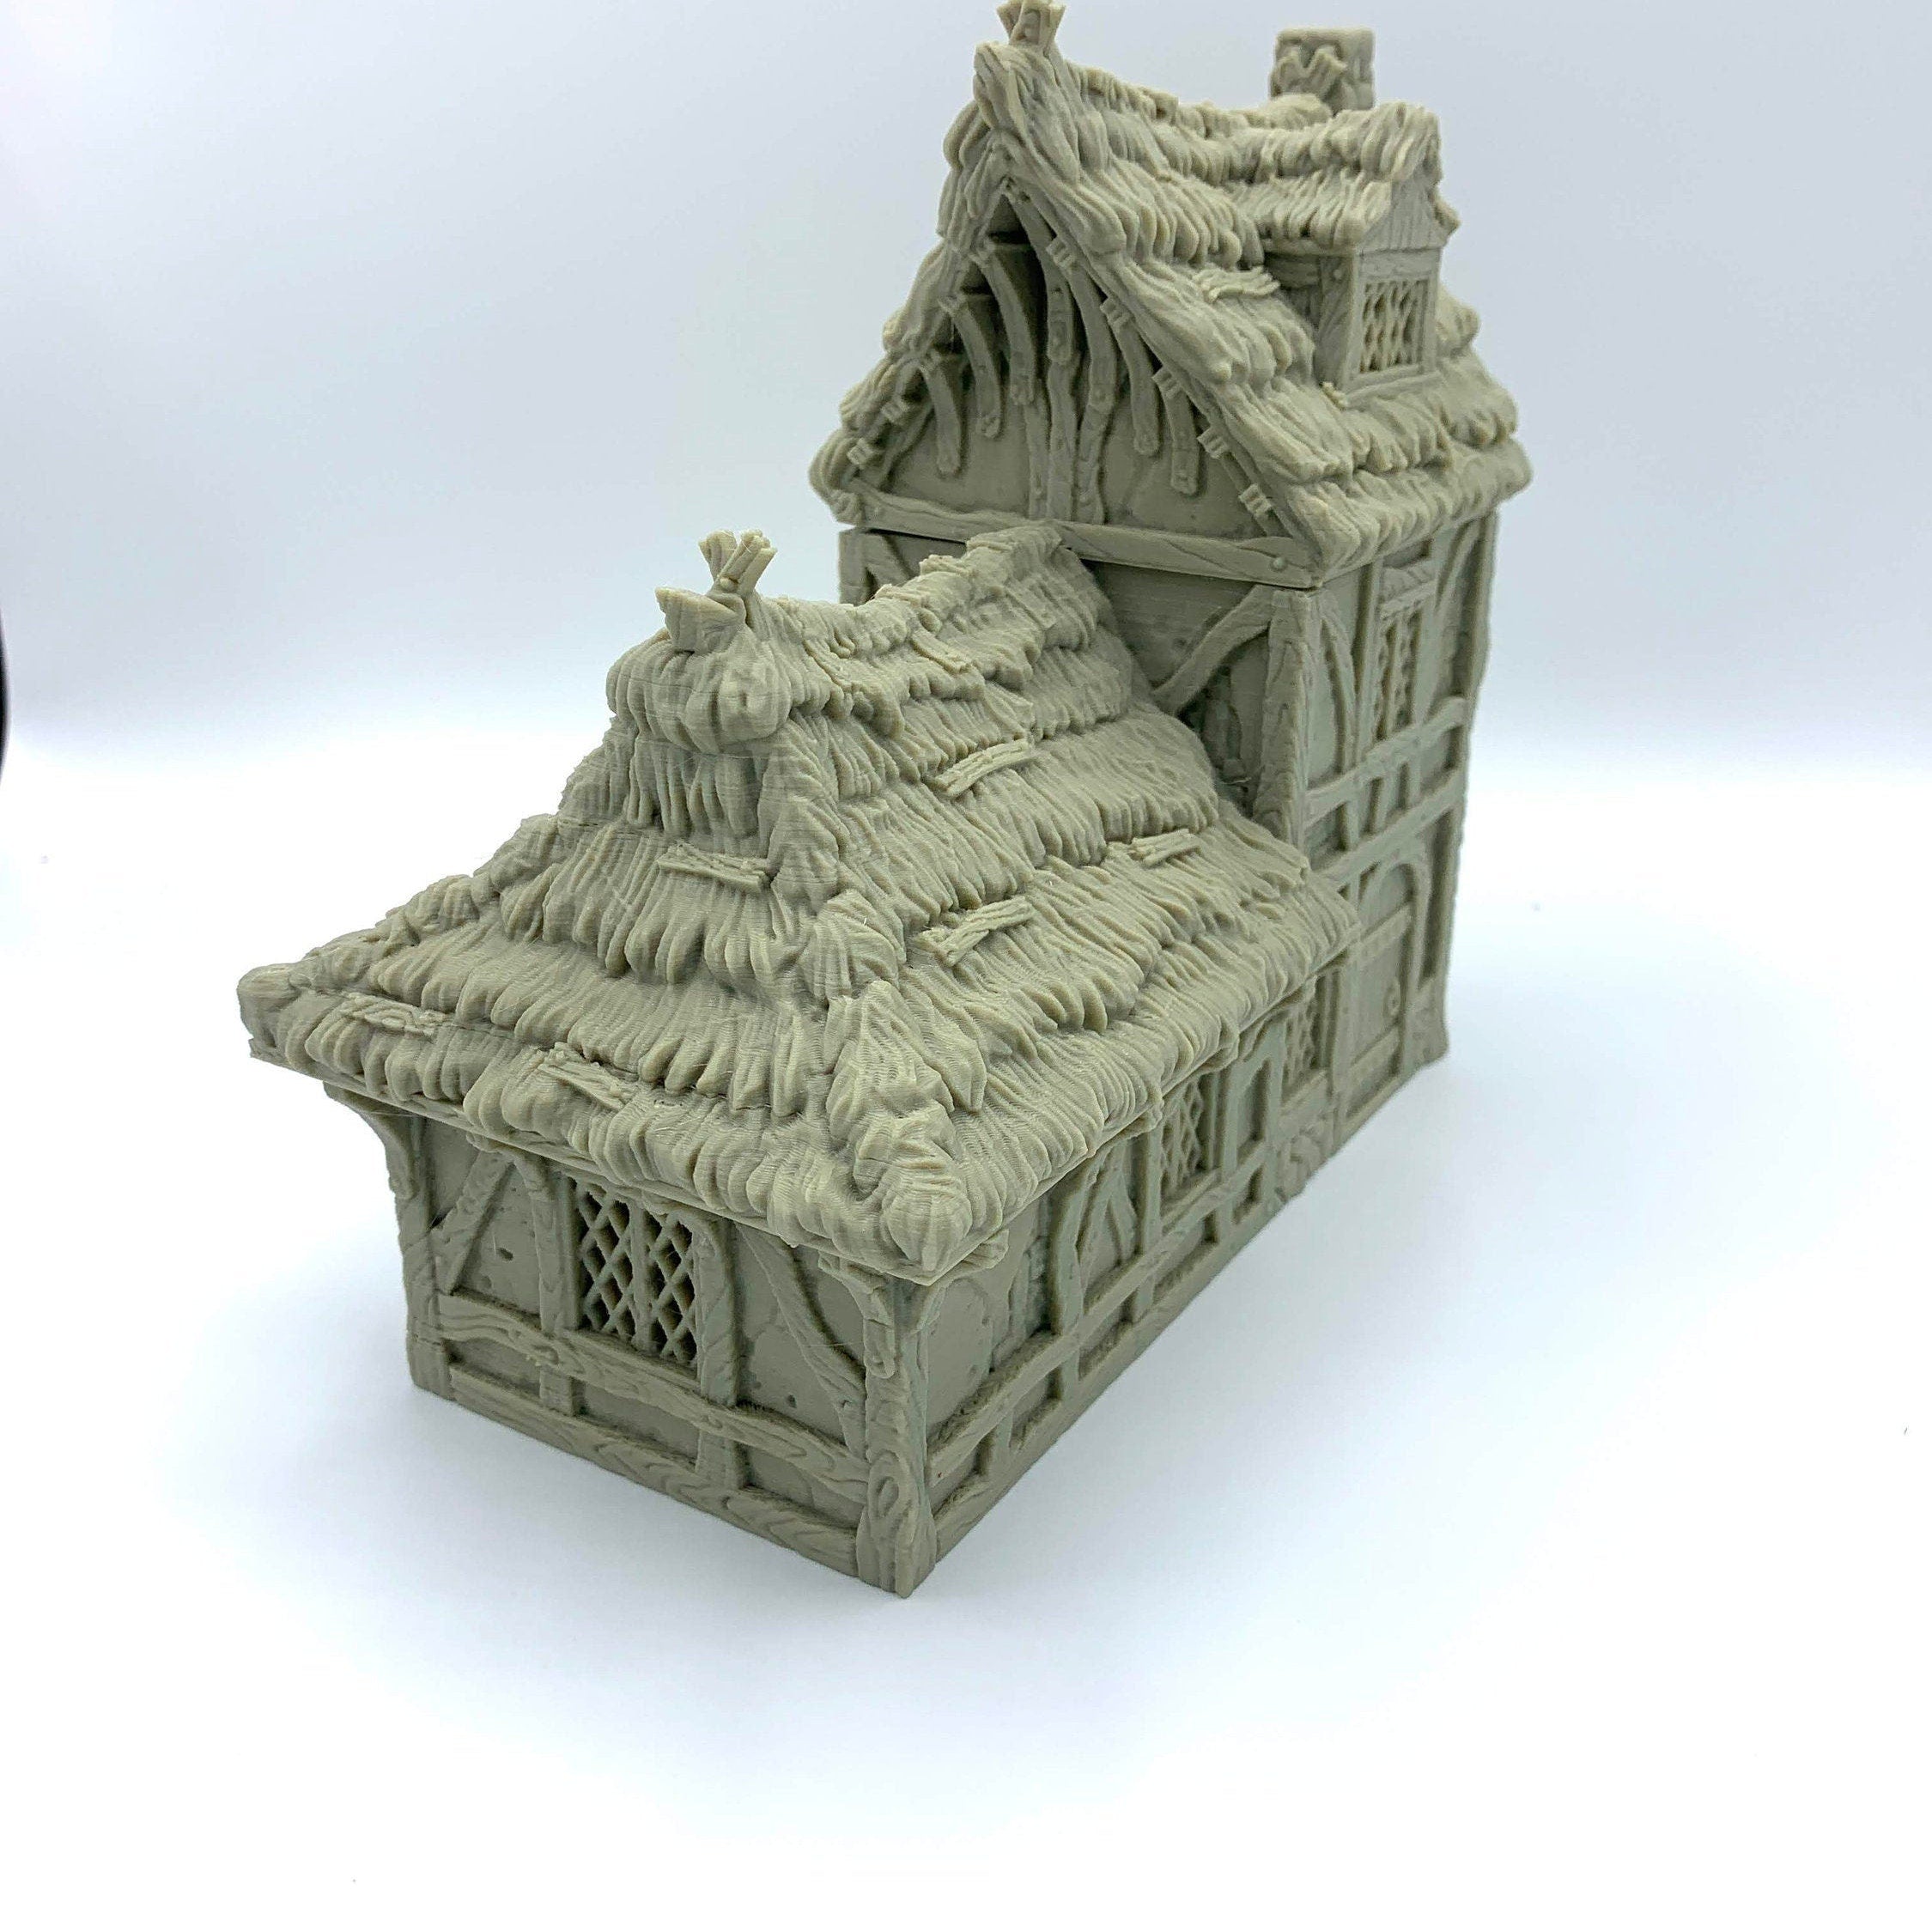 City Of Tarok - Medieval House 3 (Thatched Roof Version) / 28mm Wargame / RPG 3d Printed Tabletop Terrain